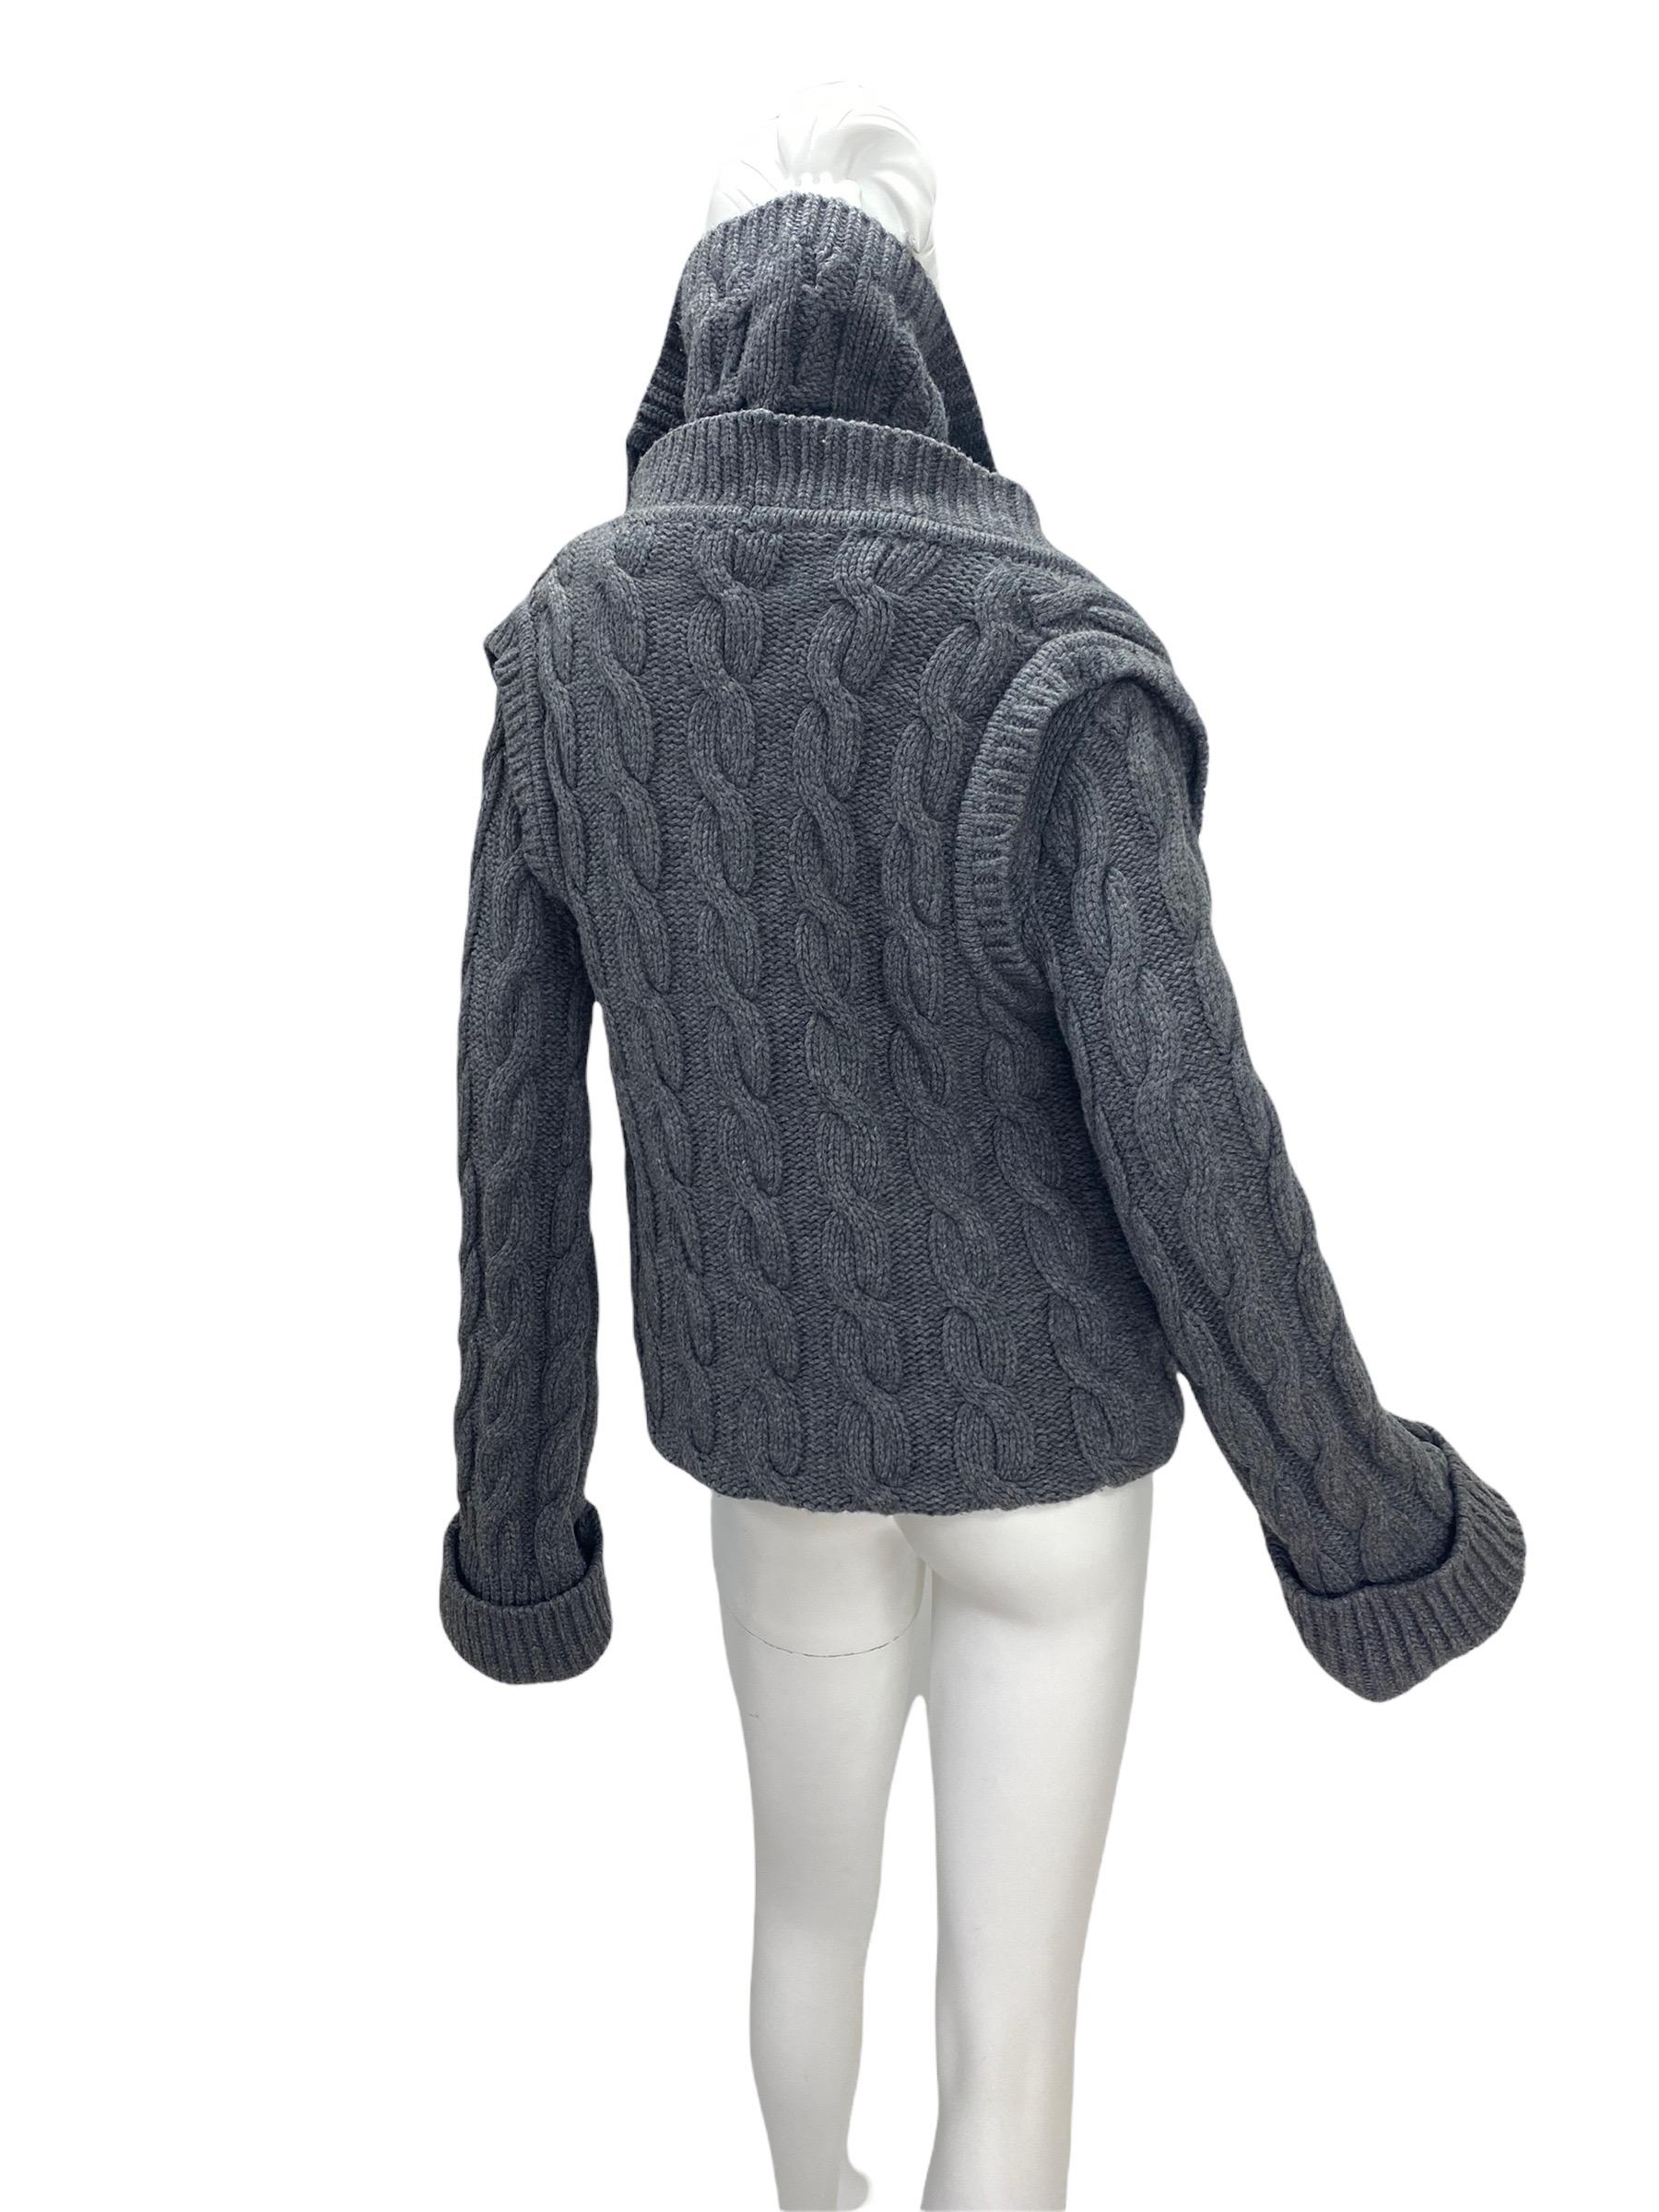 A/W 2006 ALEXANDER McQUEEN The Widows of Culloden Knit Convertible Cardigan Coat For Sale 3